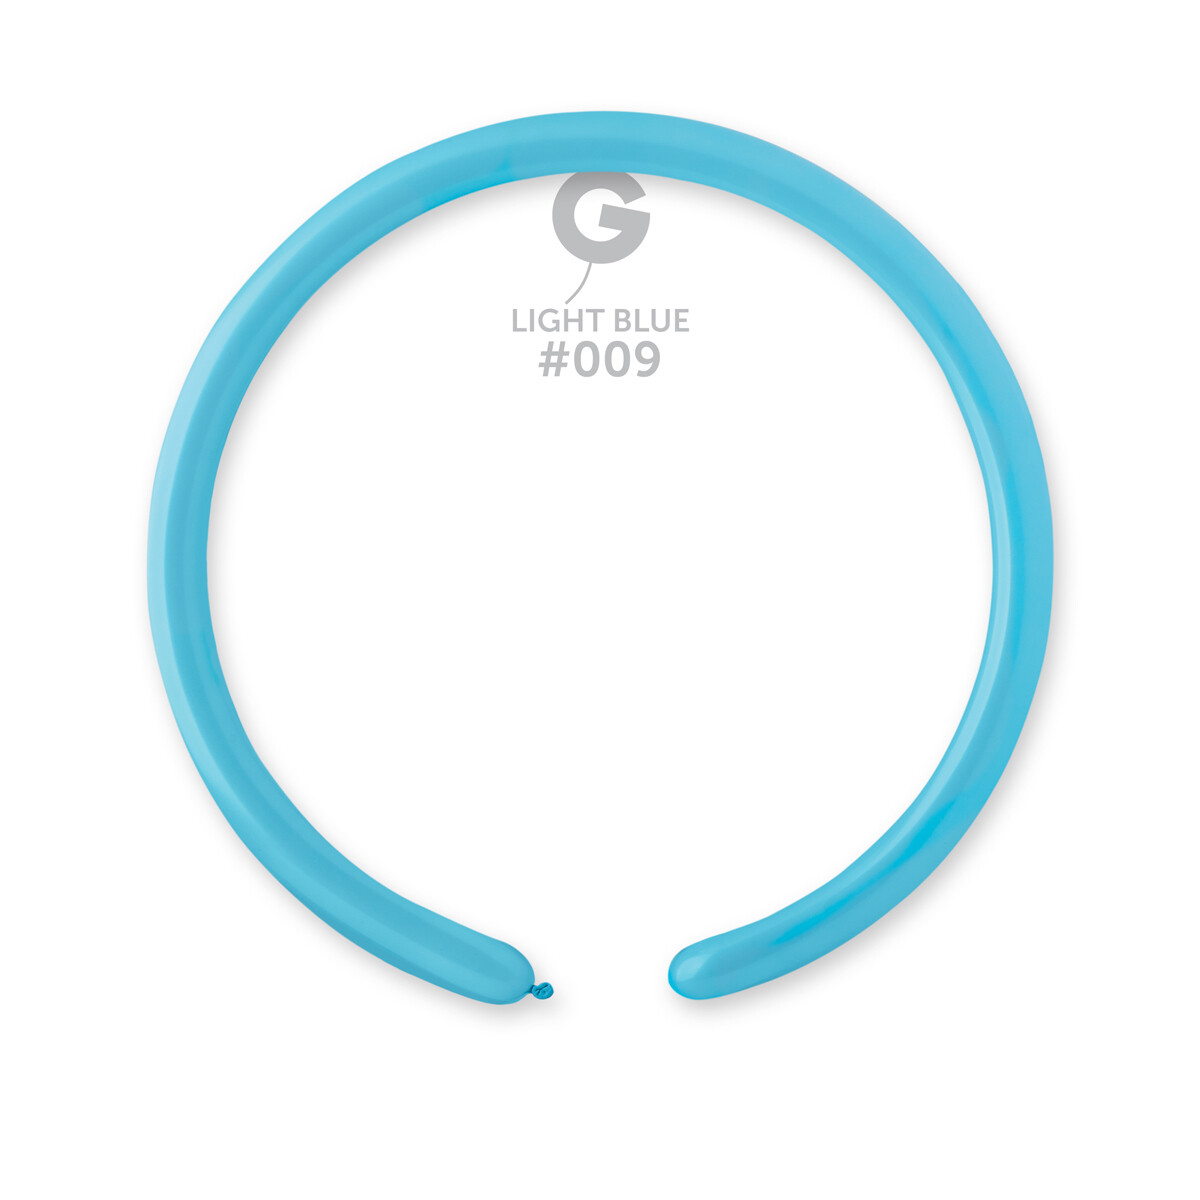 Standad Light Blue #009 1in - 50 pieces